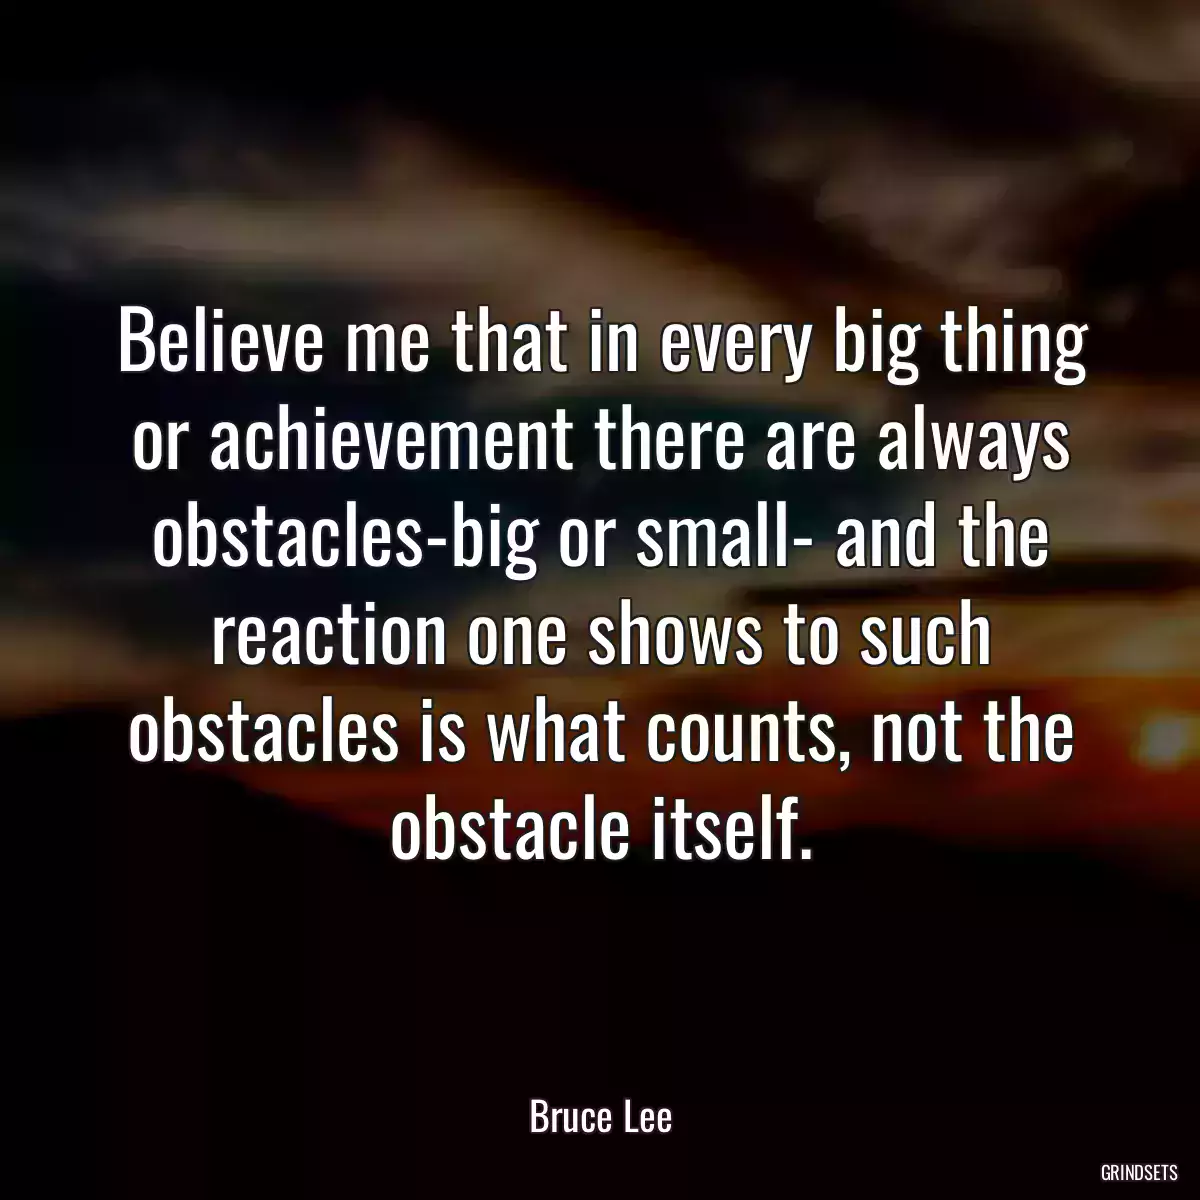 Believe me that in every big thing or achievement there are always obstacles-big or small- and the reaction one shows to such obstacles is what counts, not the obstacle itself.